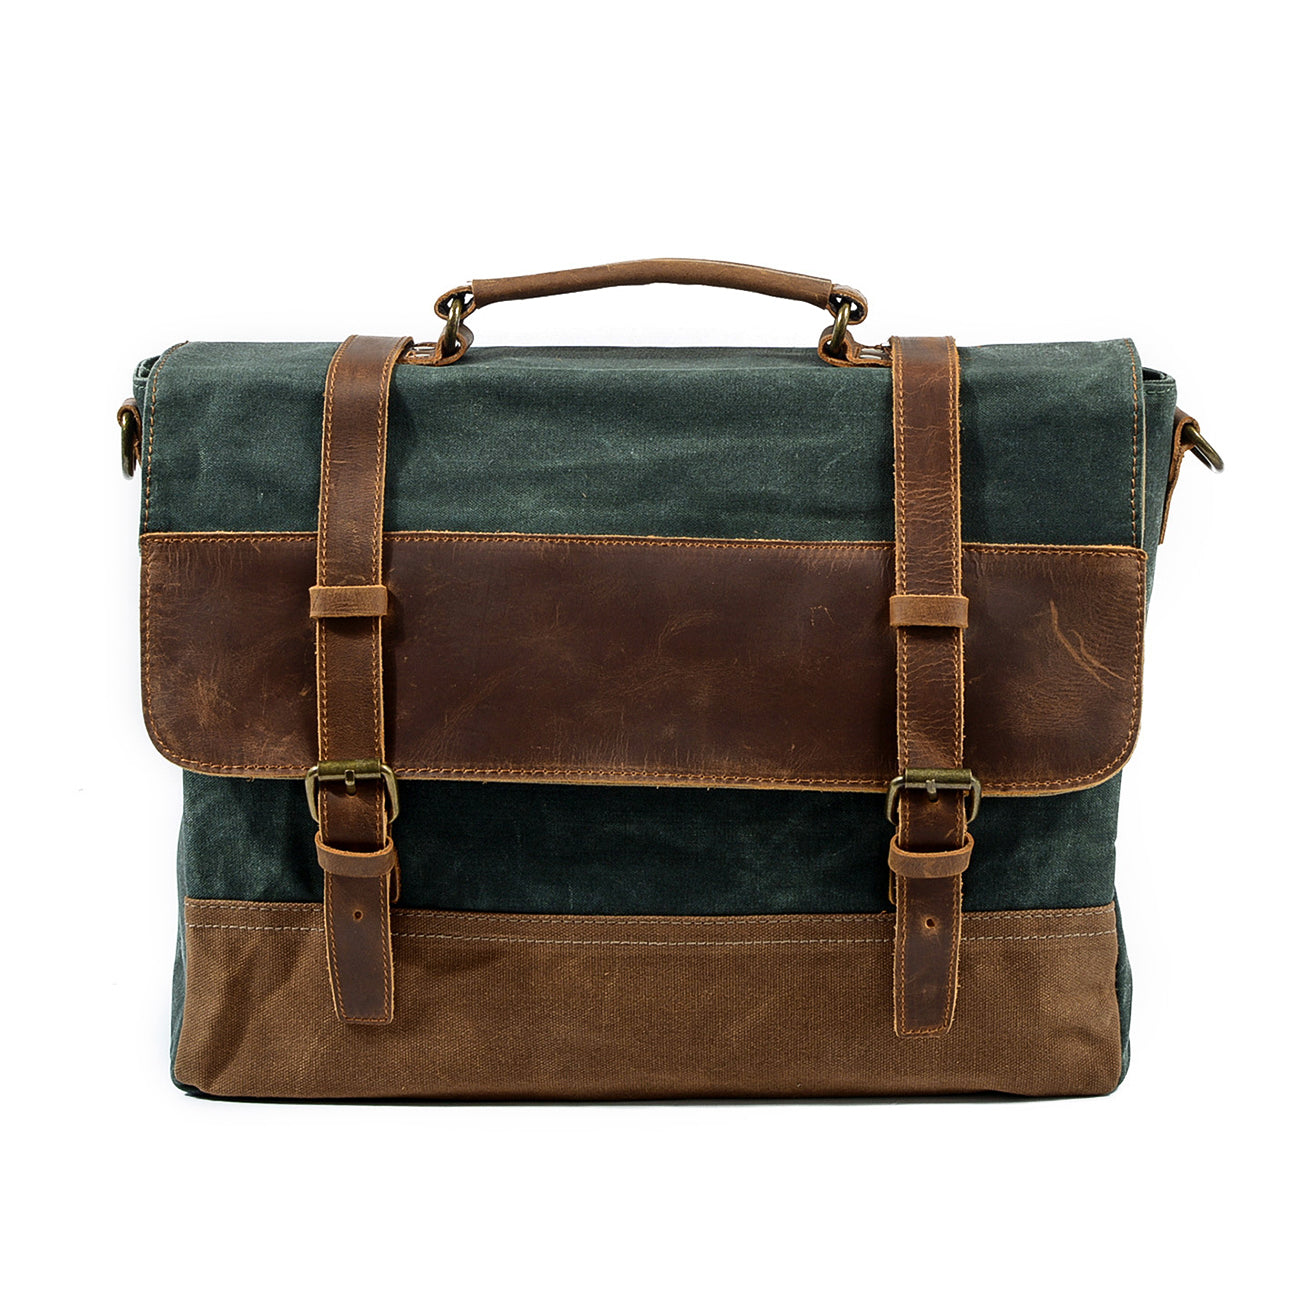 brown leather waxed canvas laptop bag with leather straps and interior organizer to carry a macbook